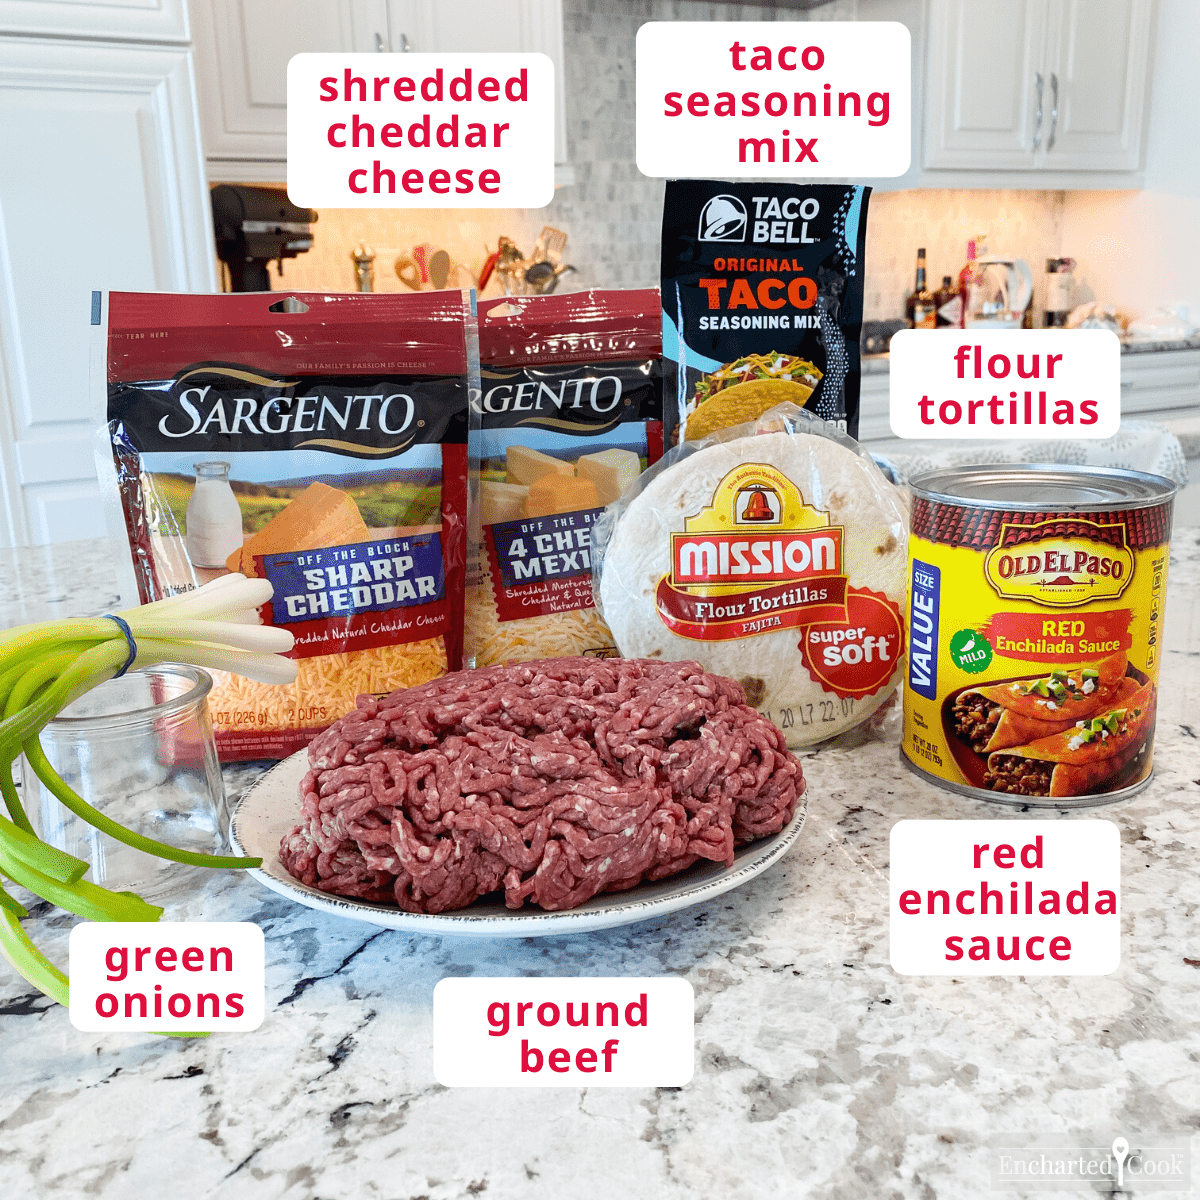 Ingredients with text overlay labels. Clockwise from top right: taco seasoning mix, flour tortillas, red enchilada sauce, ground beef, green onions, shredded cheddar cheese.